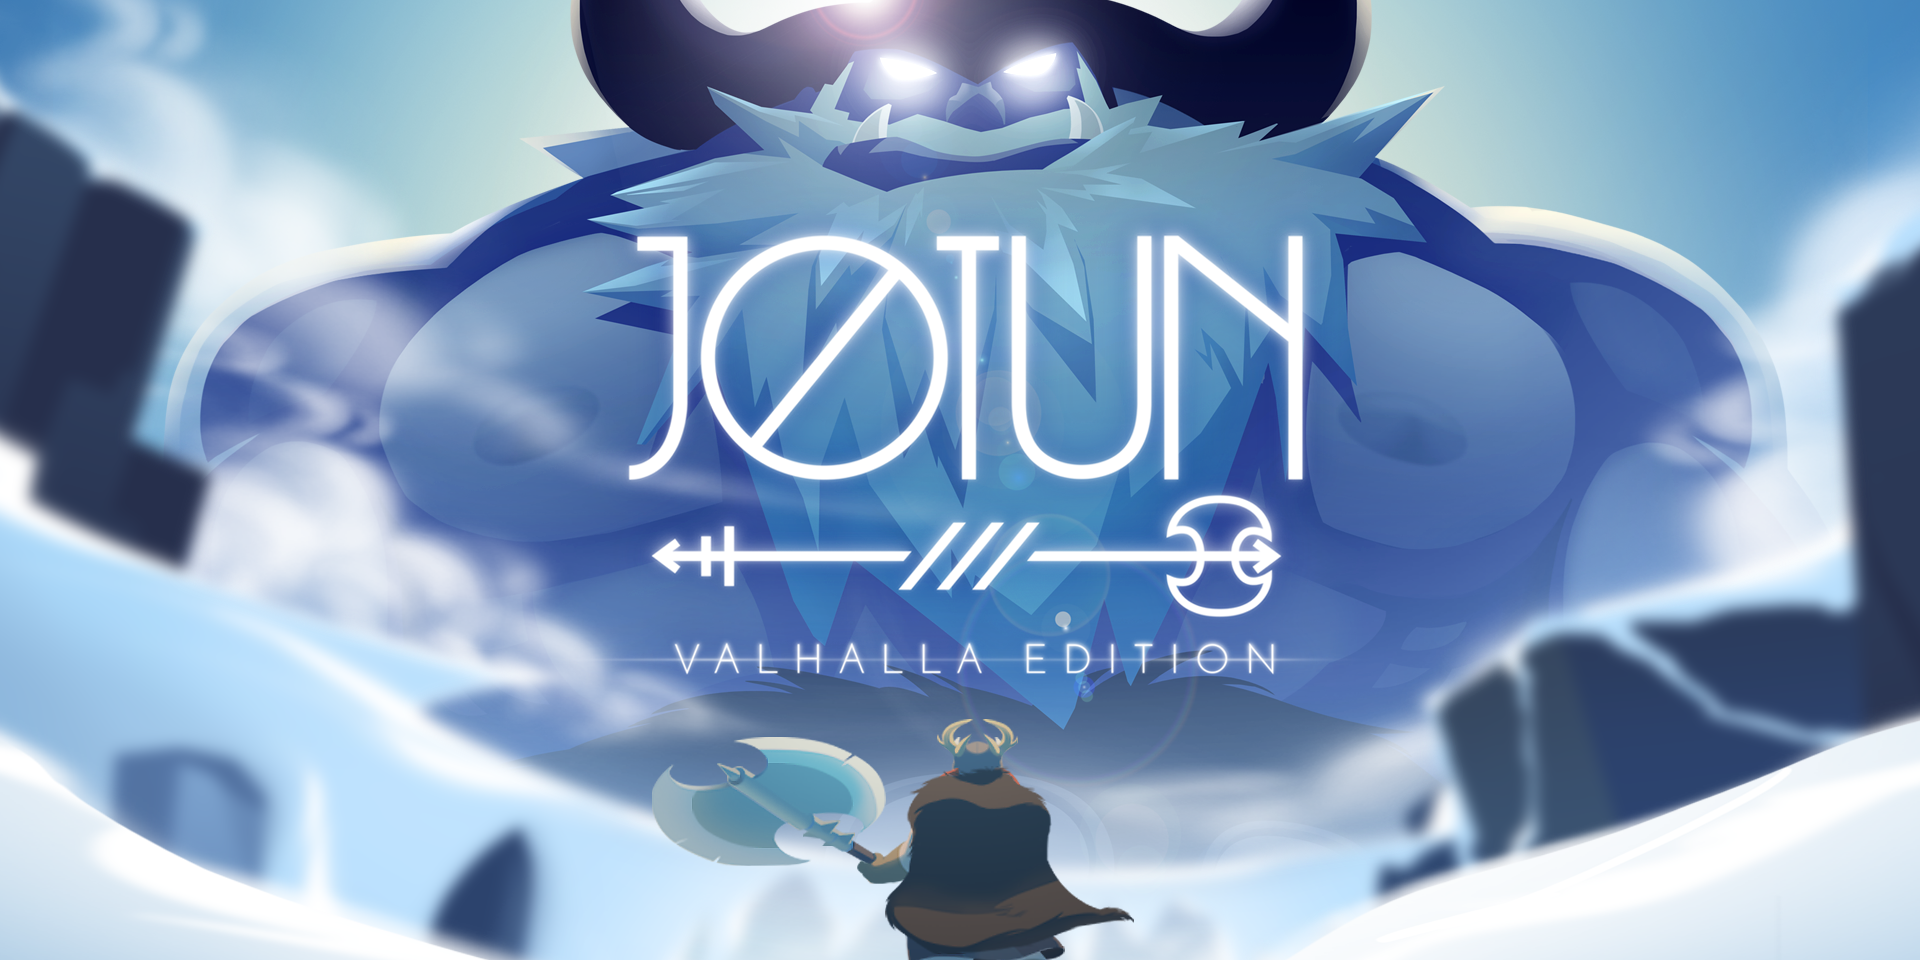 Games/Apps: Jotun $5, Persona 5 SteelBook from $48, iOS freebies, more